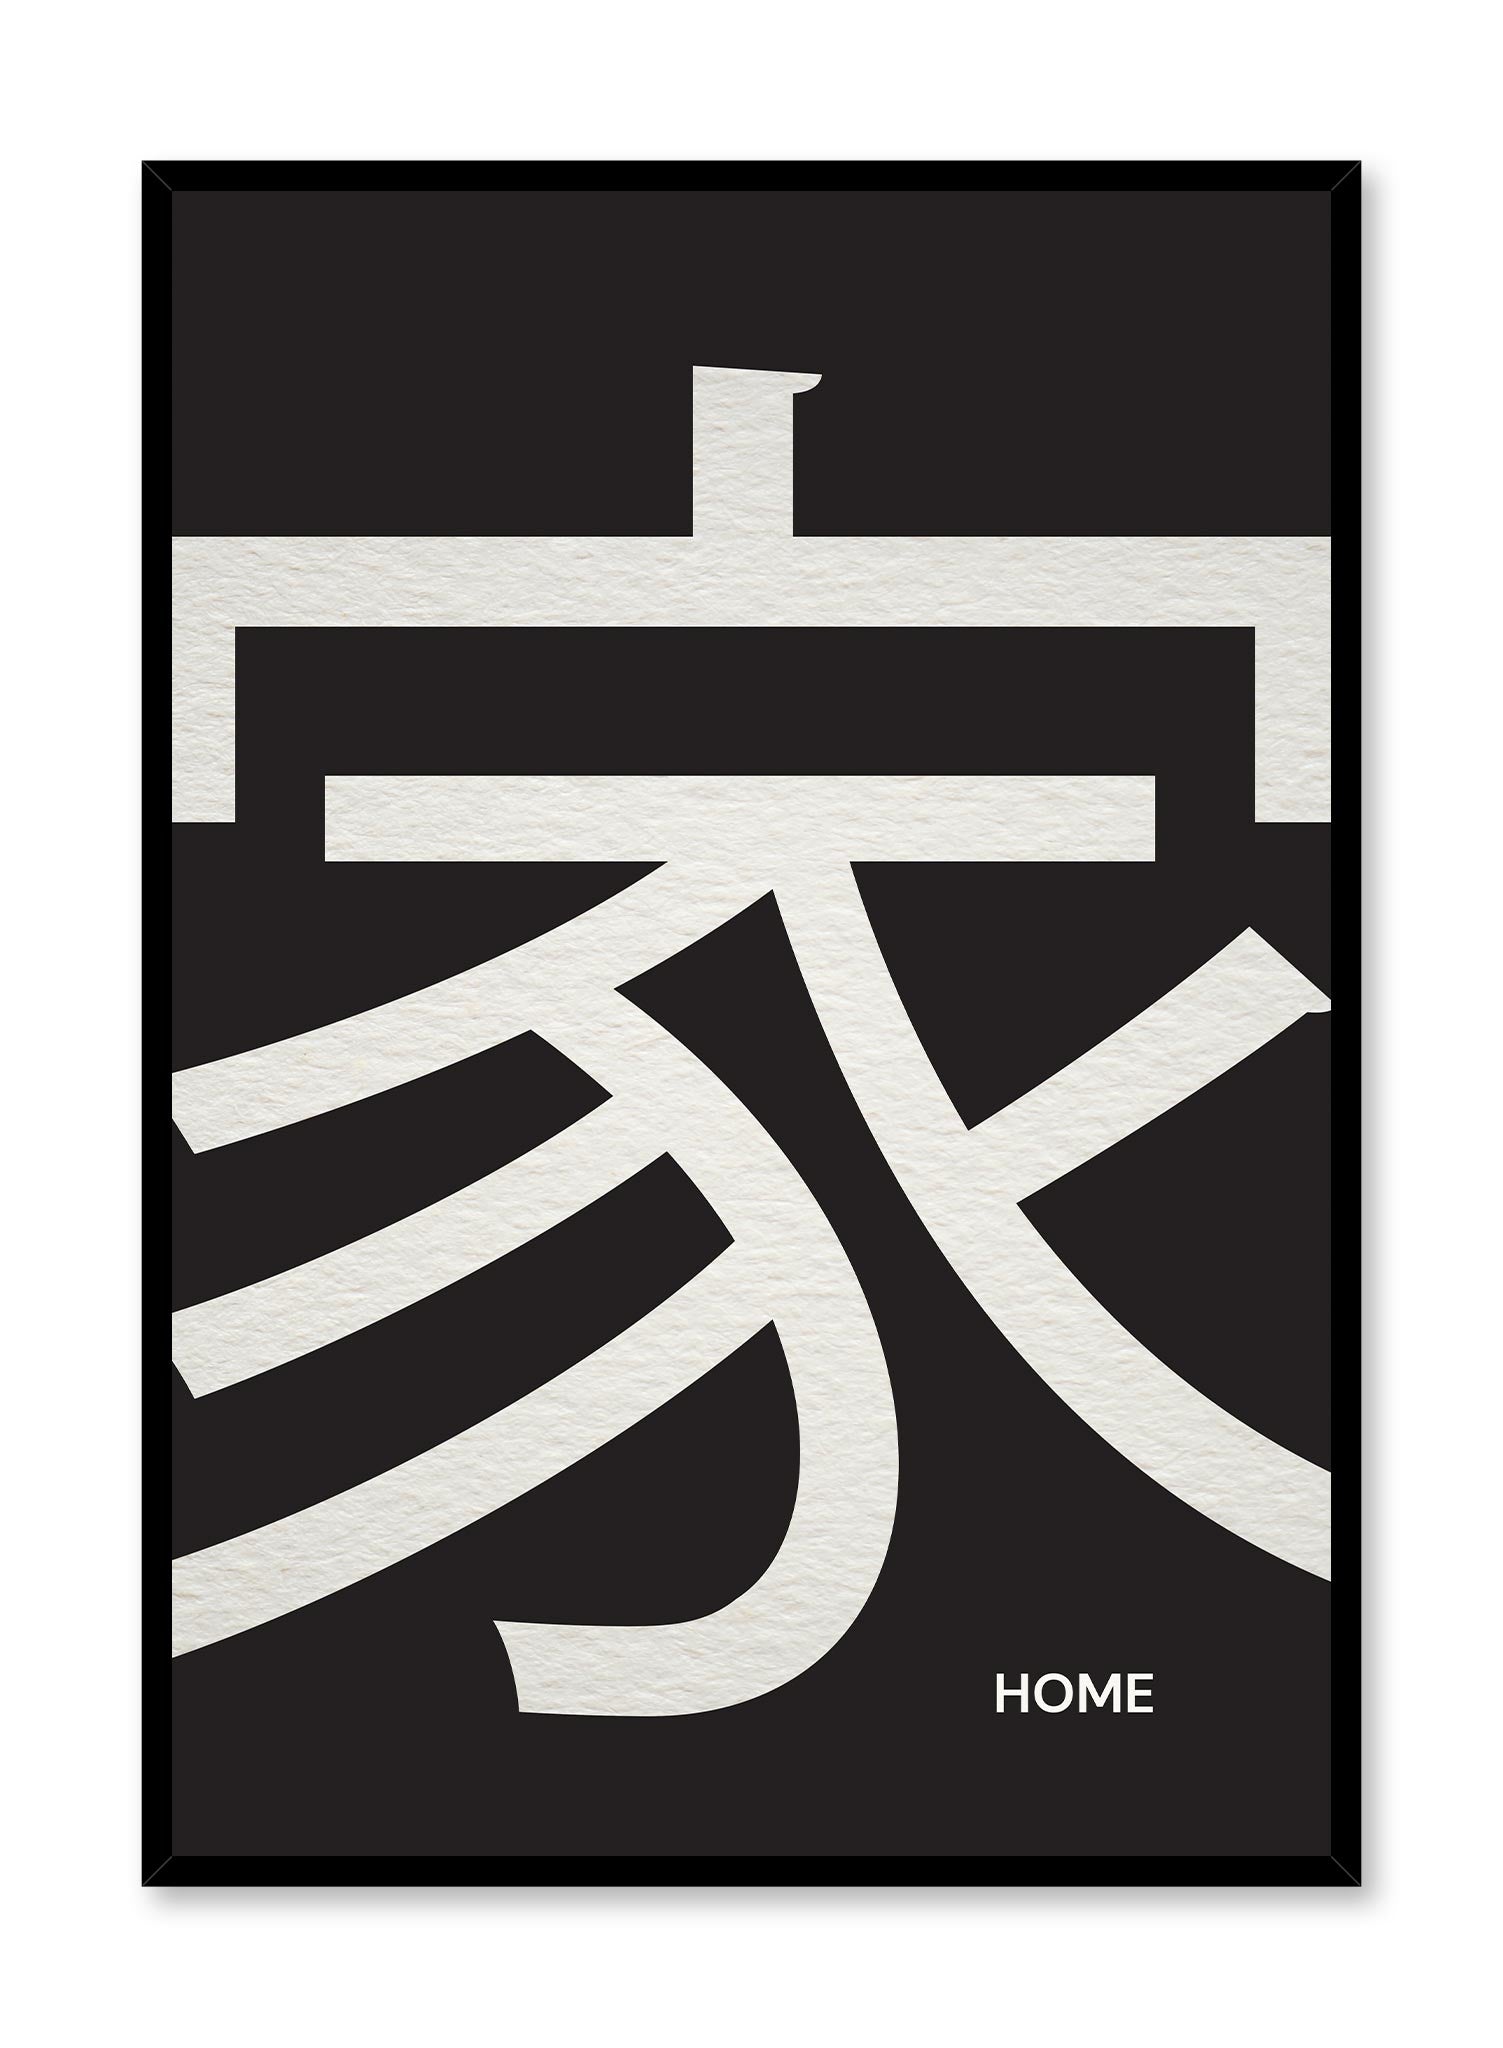 Uchi is a minimalist typography by Opposite Wall of the word "Home" written in Japanese. 